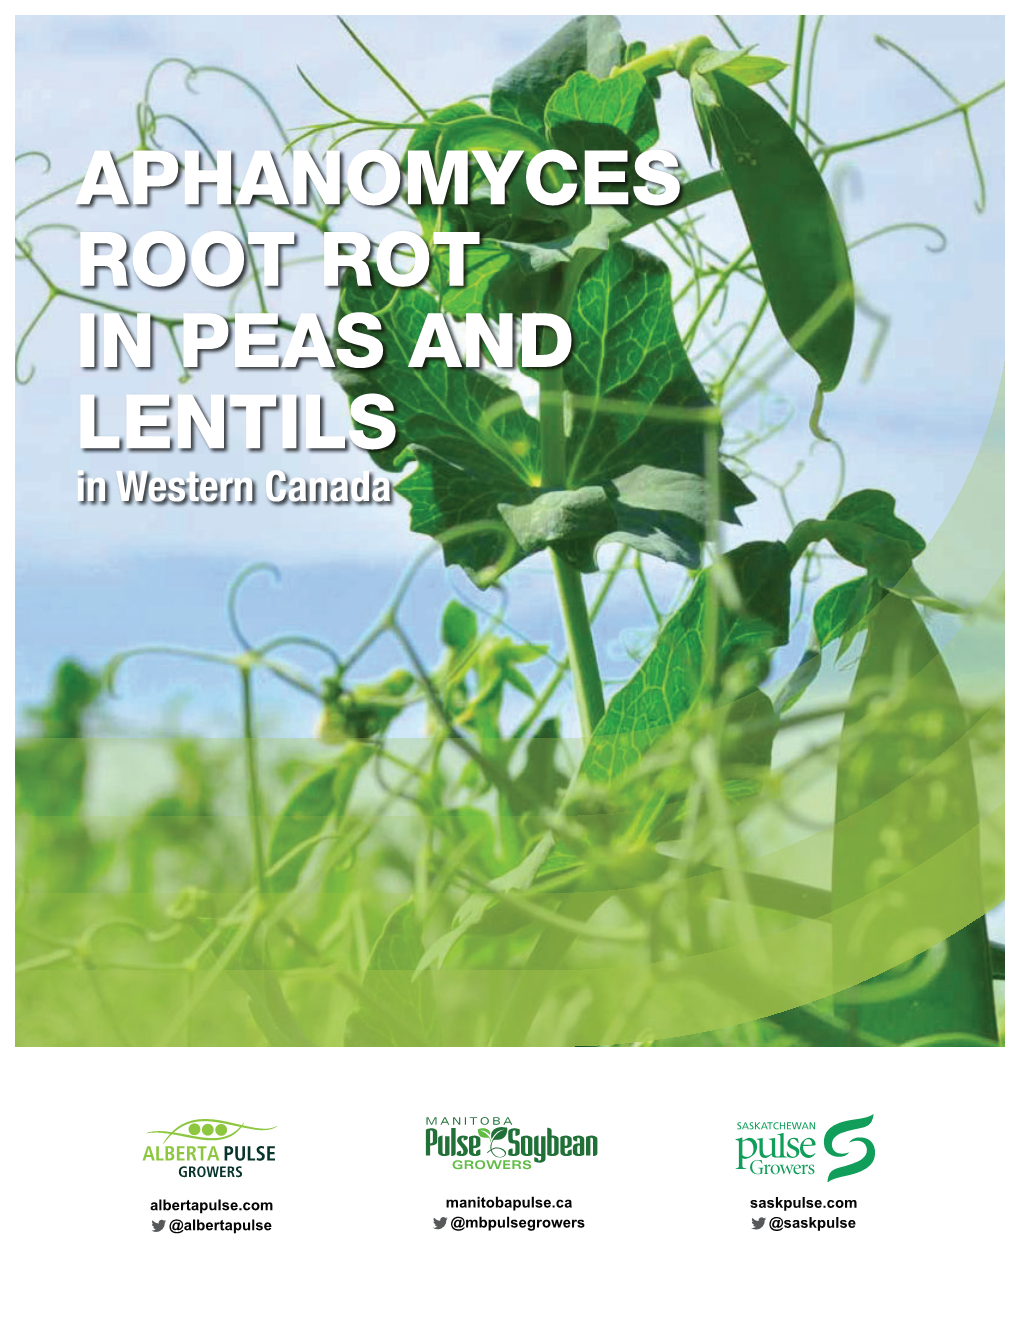 APHANOMYCES ROOT ROT in PEAS and LENTILS in Western Canada